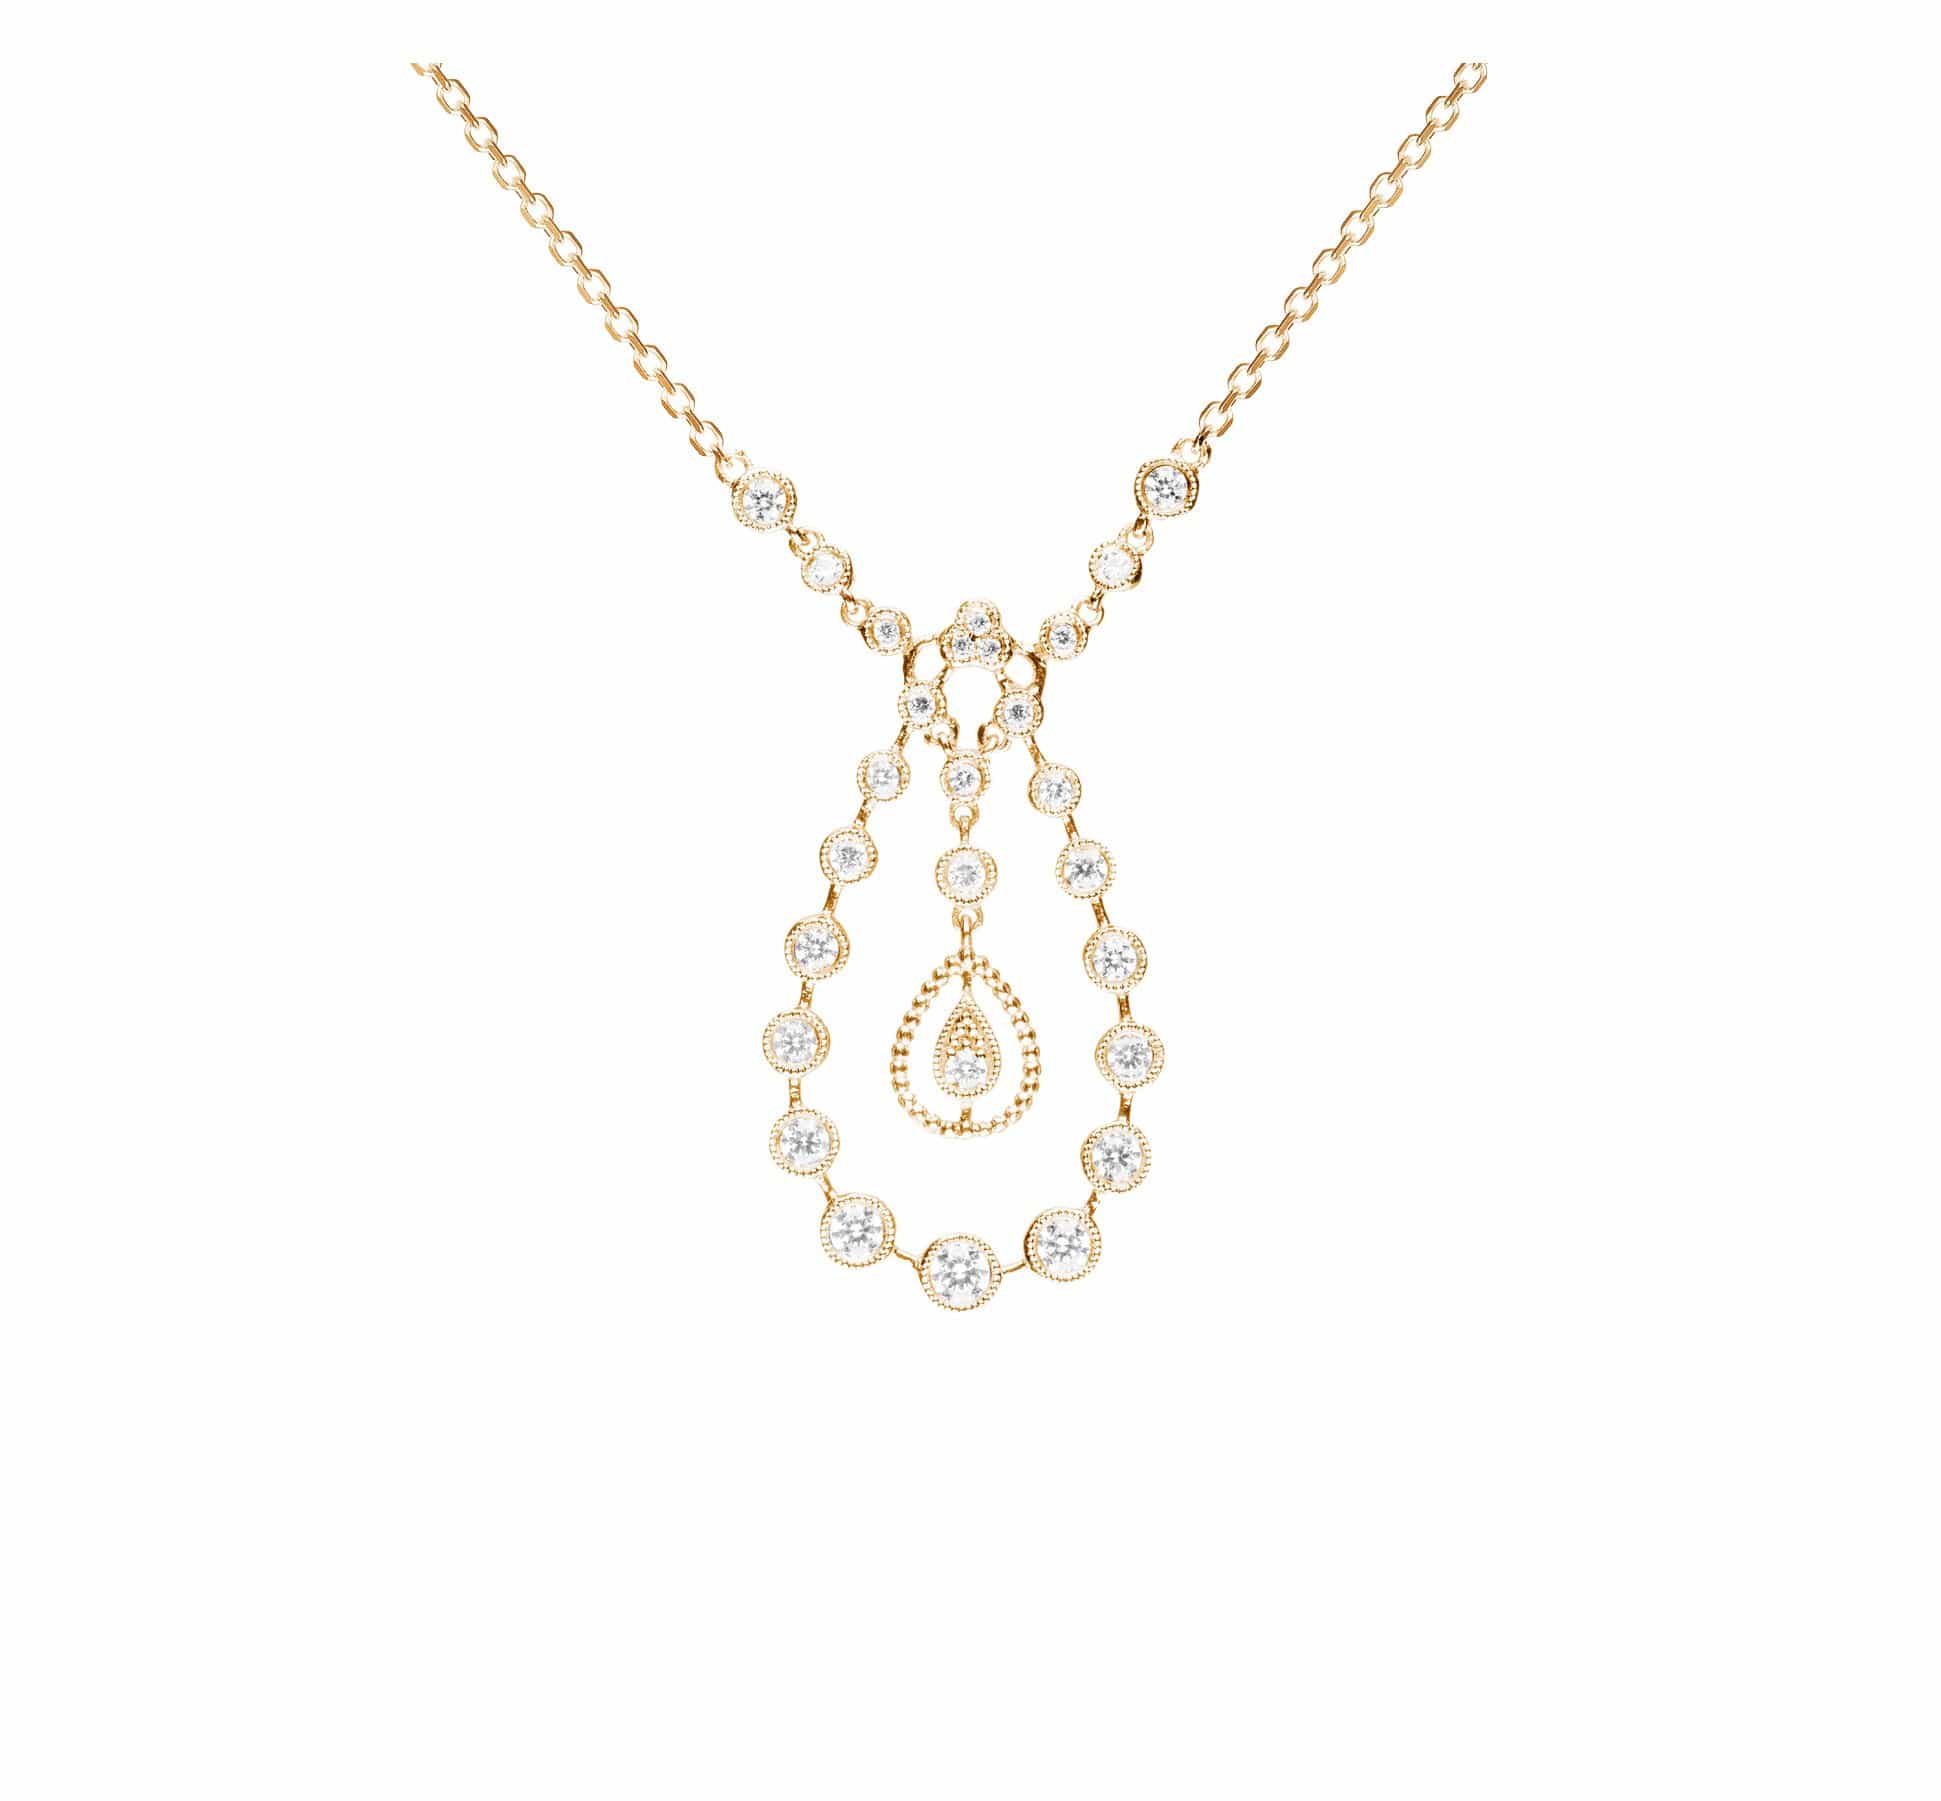 Mademoiselle Gold and diamonds